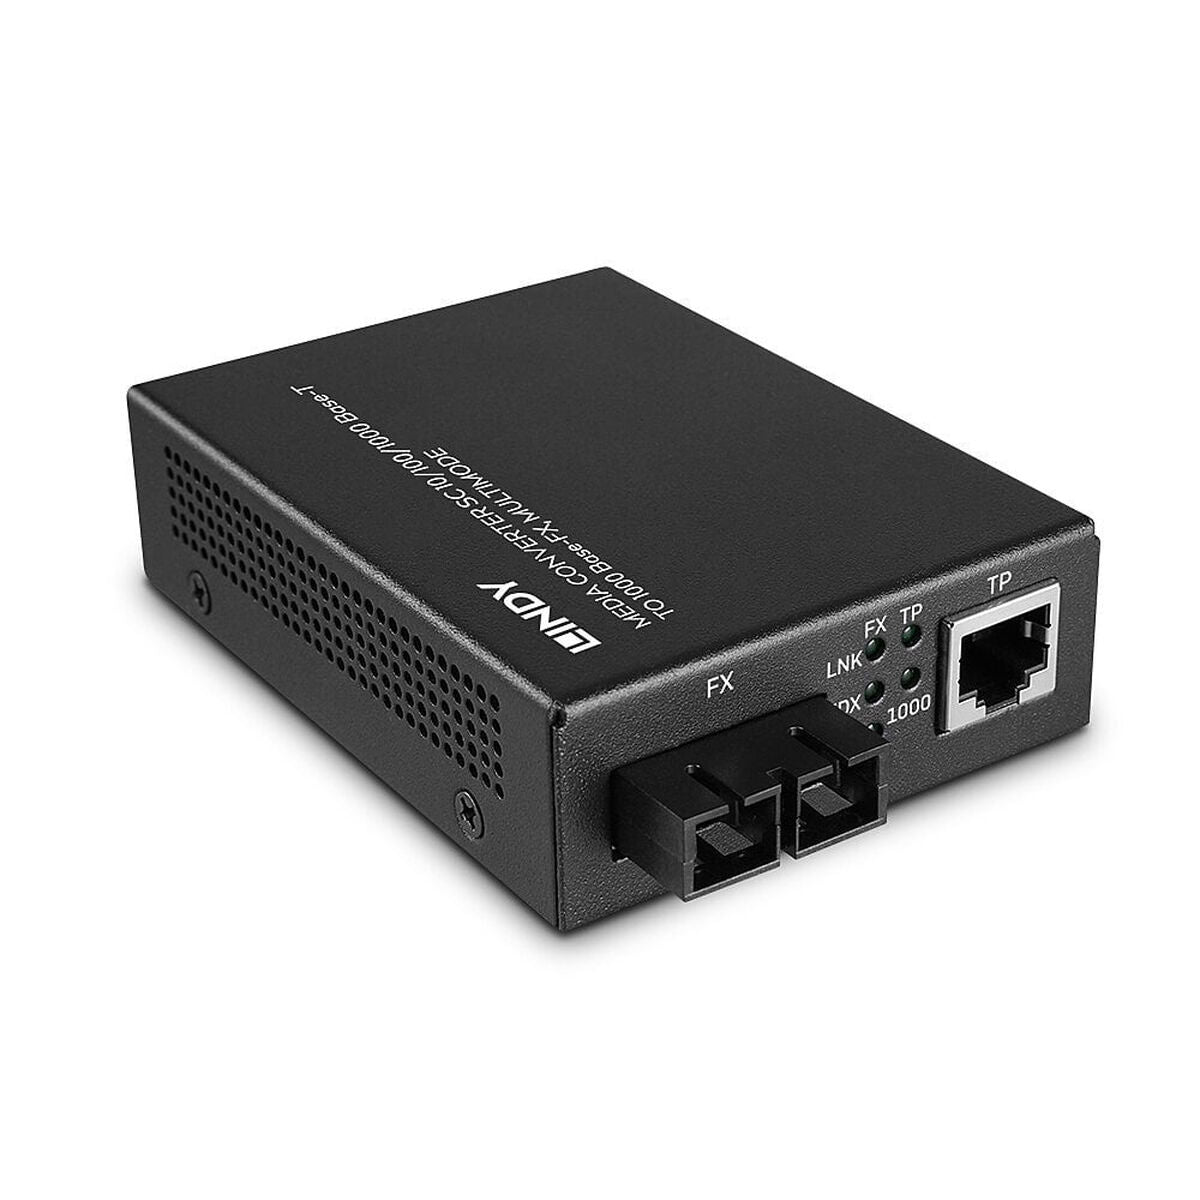 Multimode Media Converter LINDY 25119, LINDY, Computing, Network devices, switch-lindy-25119, :Black, black friday / cyber monday, Brand_LINDY, category-reference-2609, category-reference-2803, category-reference-2821, category-reference-2827, category-reference-t-19685, category-reference-t-19914, category-reference-t-21367, Condition_NEW, networks/wiring, Price_50 - 100, Teleworking, RiotNook